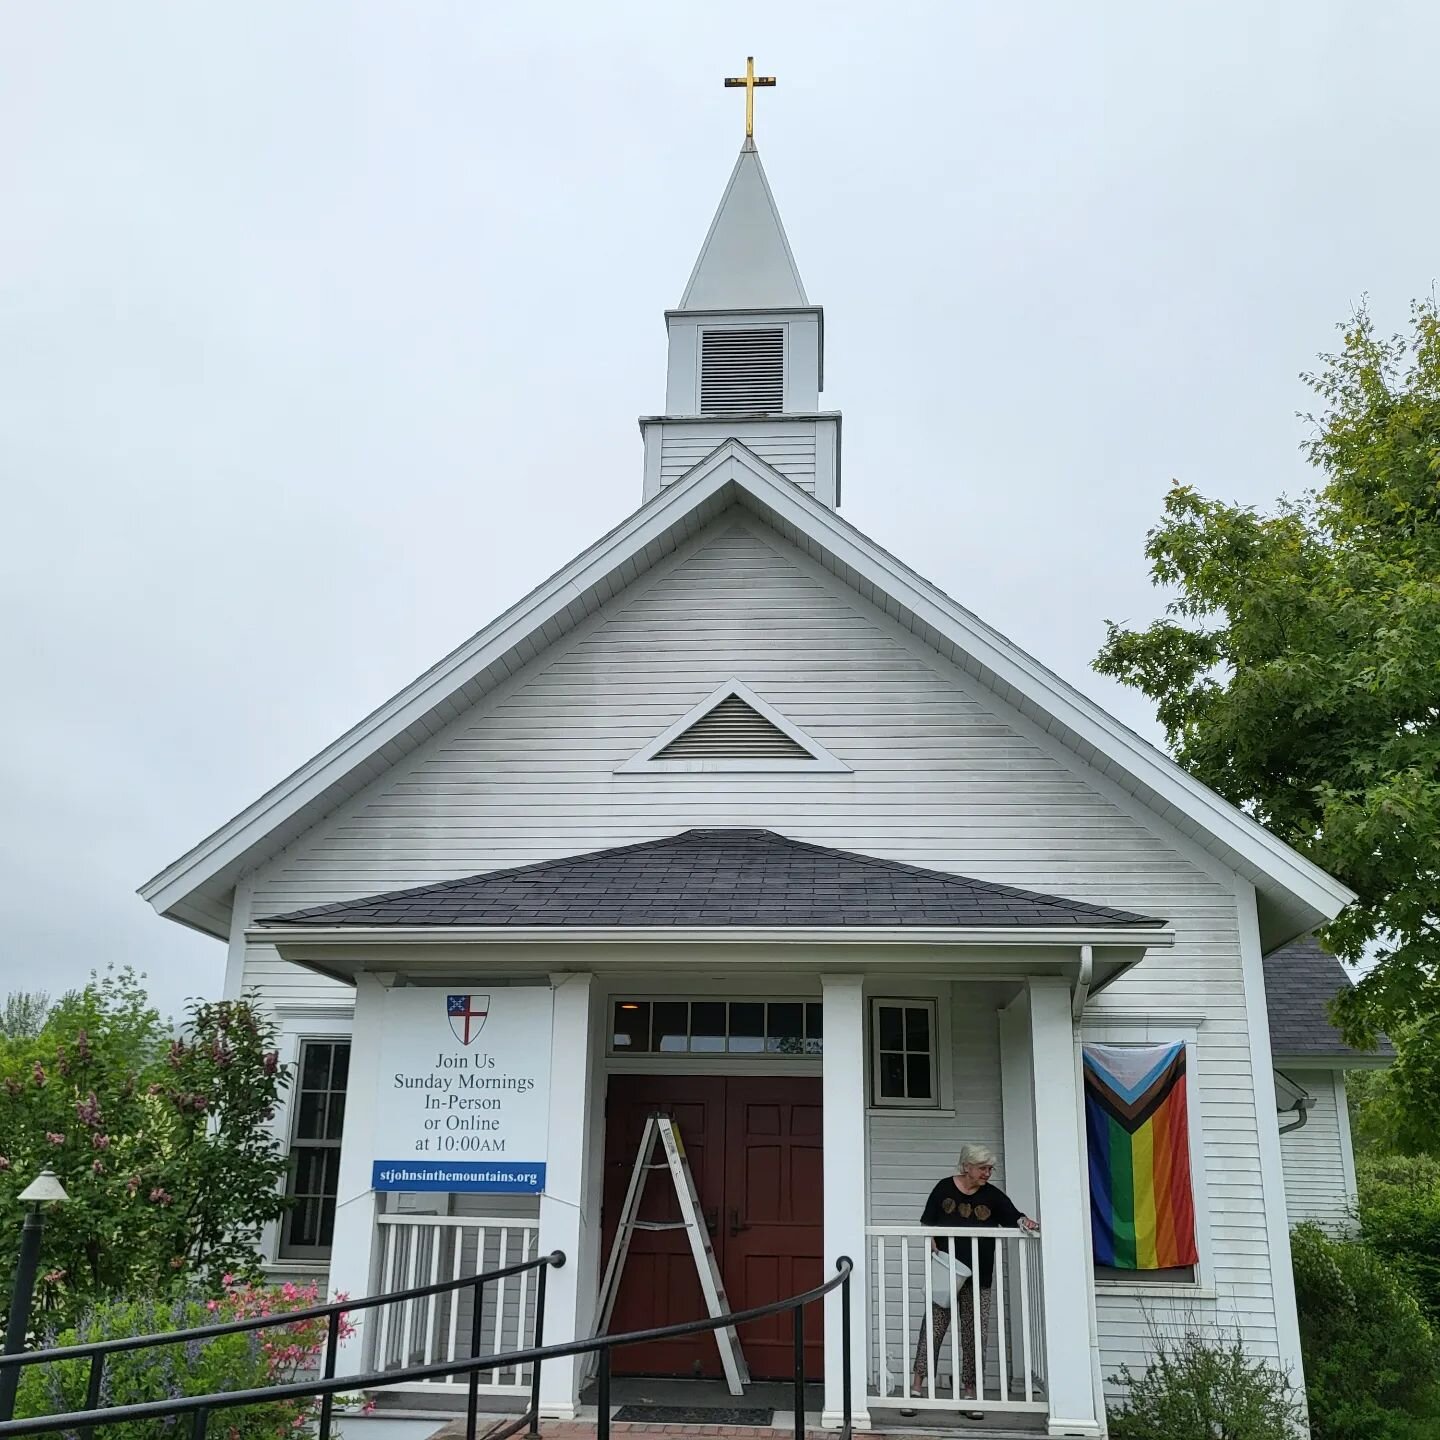 Getting ready for Pride Month. See our first of 4 reflections on our YouTube page found in the bio.

#stjohnsstowe #allarewelcome #theepiscopalchurch #episcopaldioceseofvermont #stowevt #pridemonth #jesuslovesyou